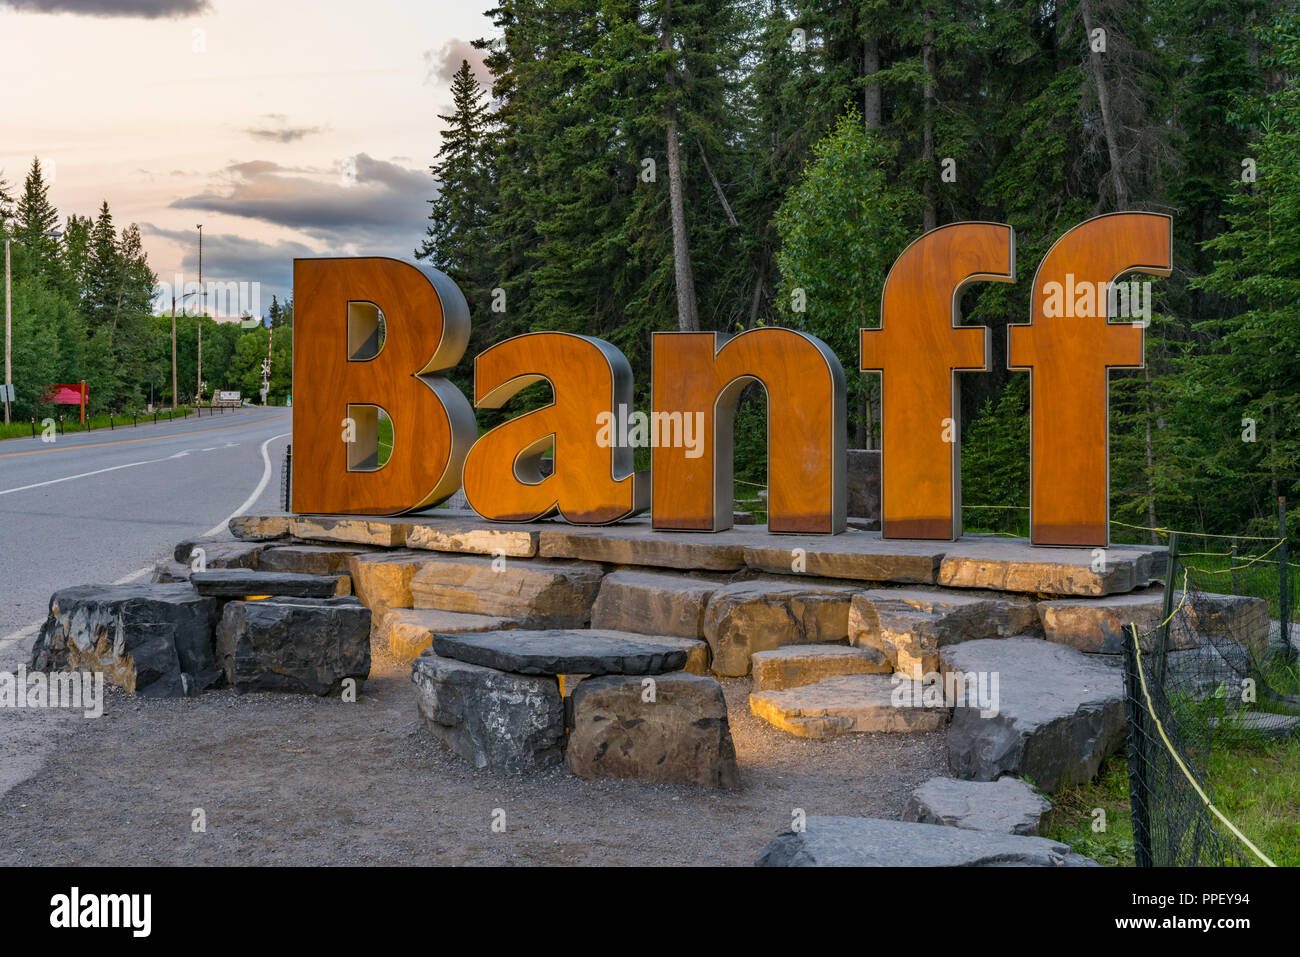 BANFF, CANADA - JULY 4, 2018: Wood welcome sculpture outside of the town of Banff, Alberta Canada Stock Photo